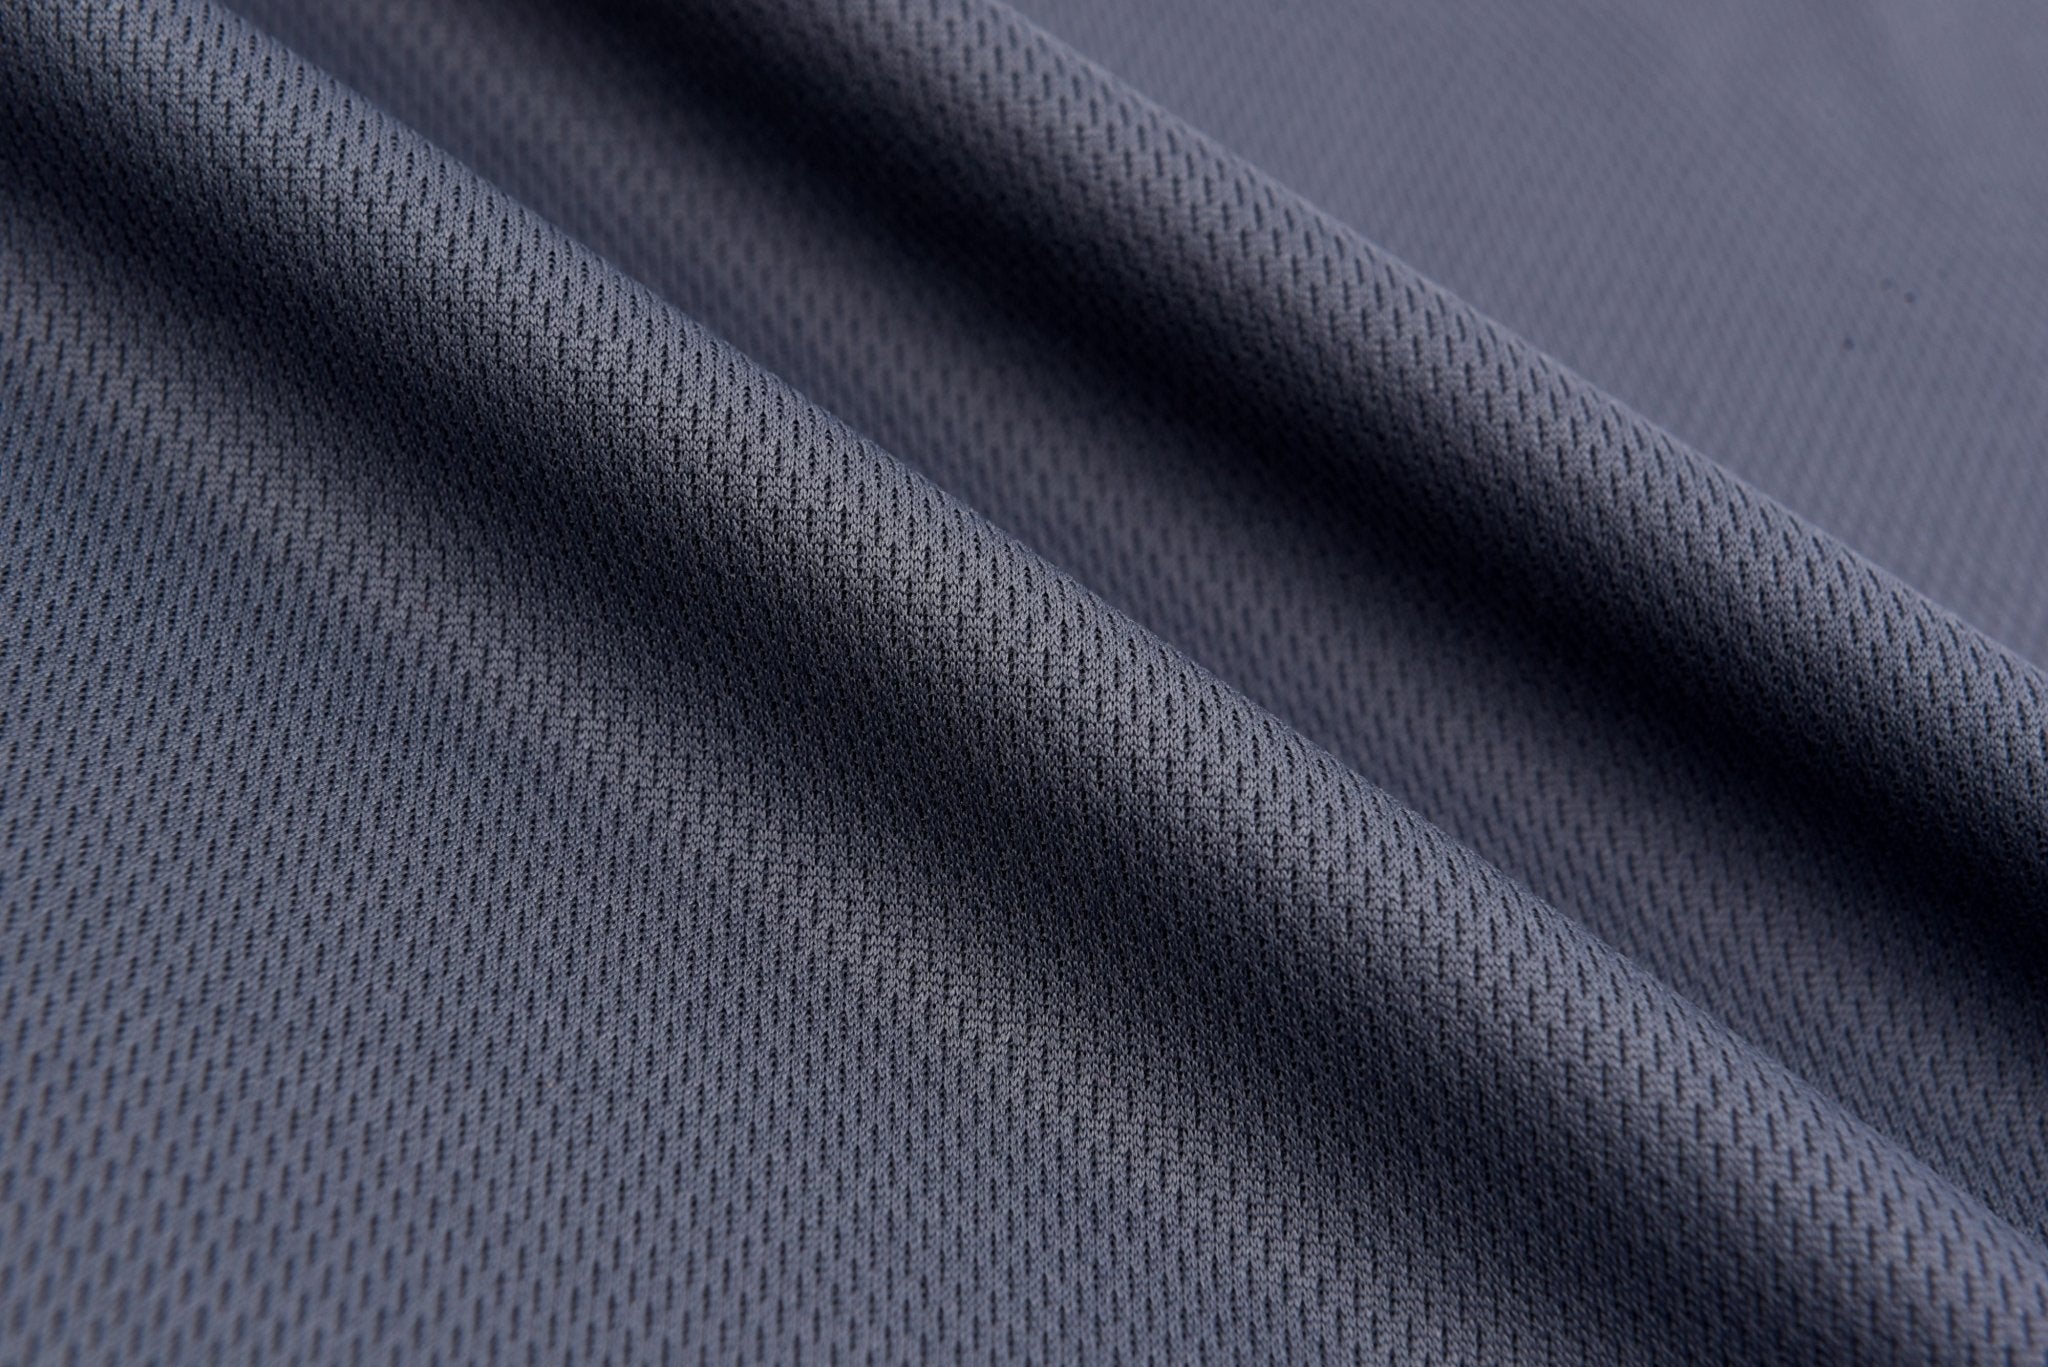  Pico Textiles Heavy Athletic Mesh Fabric - 60 Width - White  Pro Mesh Fabric - Style# 52500 : Everything Else